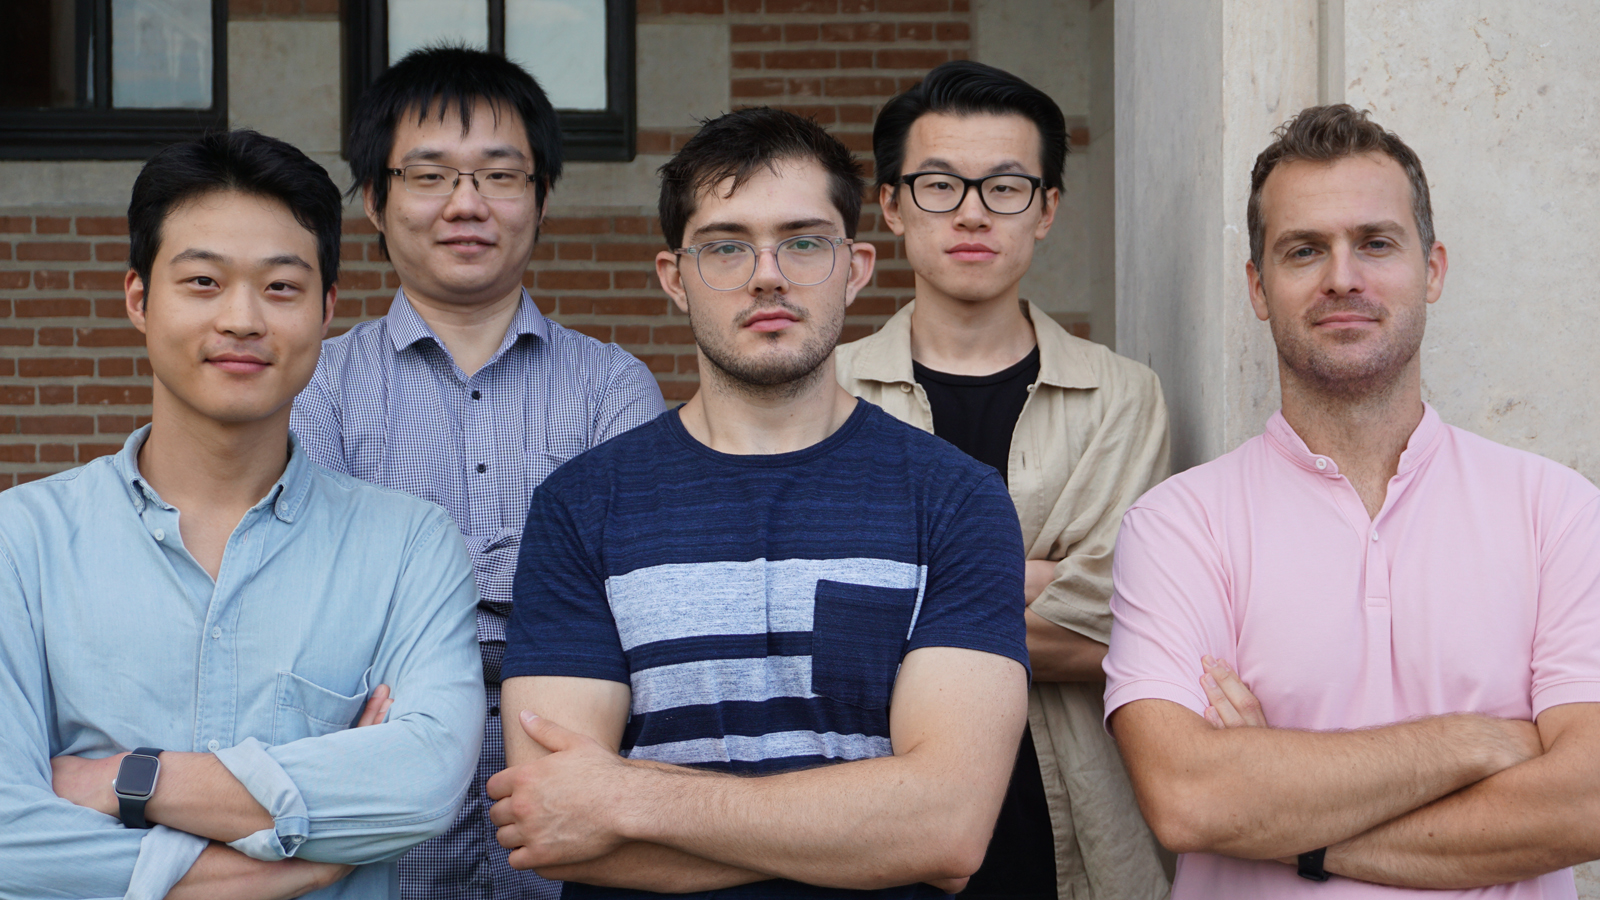 Under the direction of Anastasios Kyrillidis (right), OptimaLab members Lyle Kim (left), Chen Dun, Cameron Wolfe, and Jasper Liao increase the efficiency of complicated algorithms.